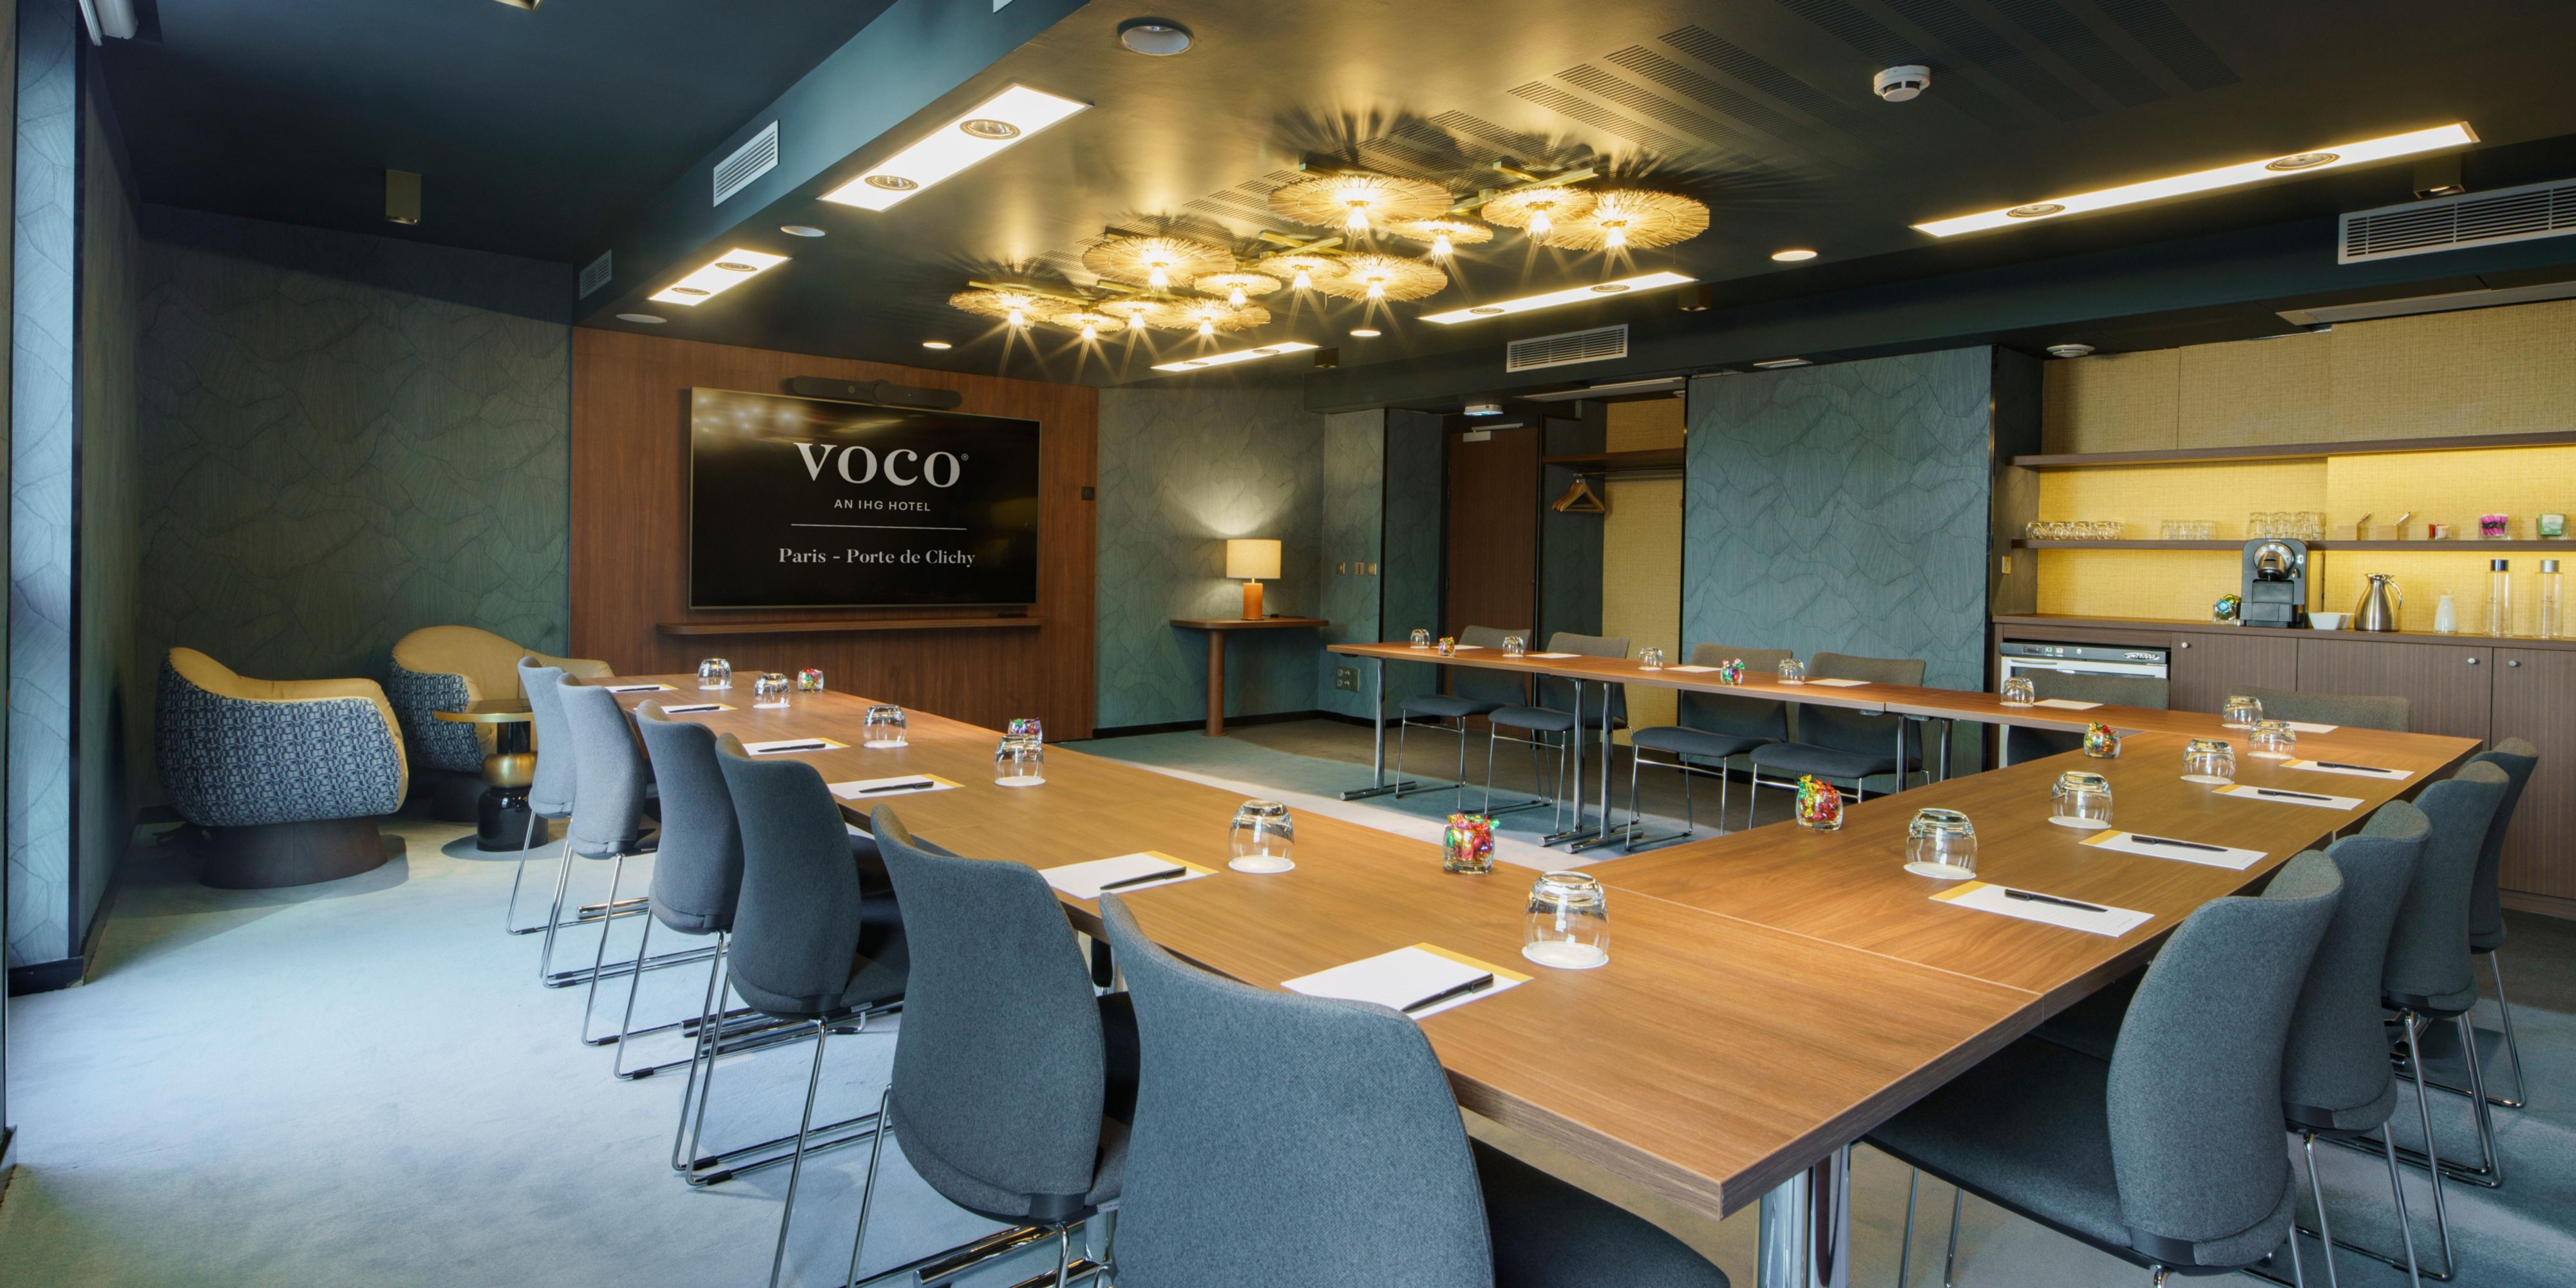 Discover our 12 well-equipped meetings rooms. Our plenary room can accommodate up to 140 people in theater style. Keep in mind that superfast Wi-fi is free everywhere in our hotel.